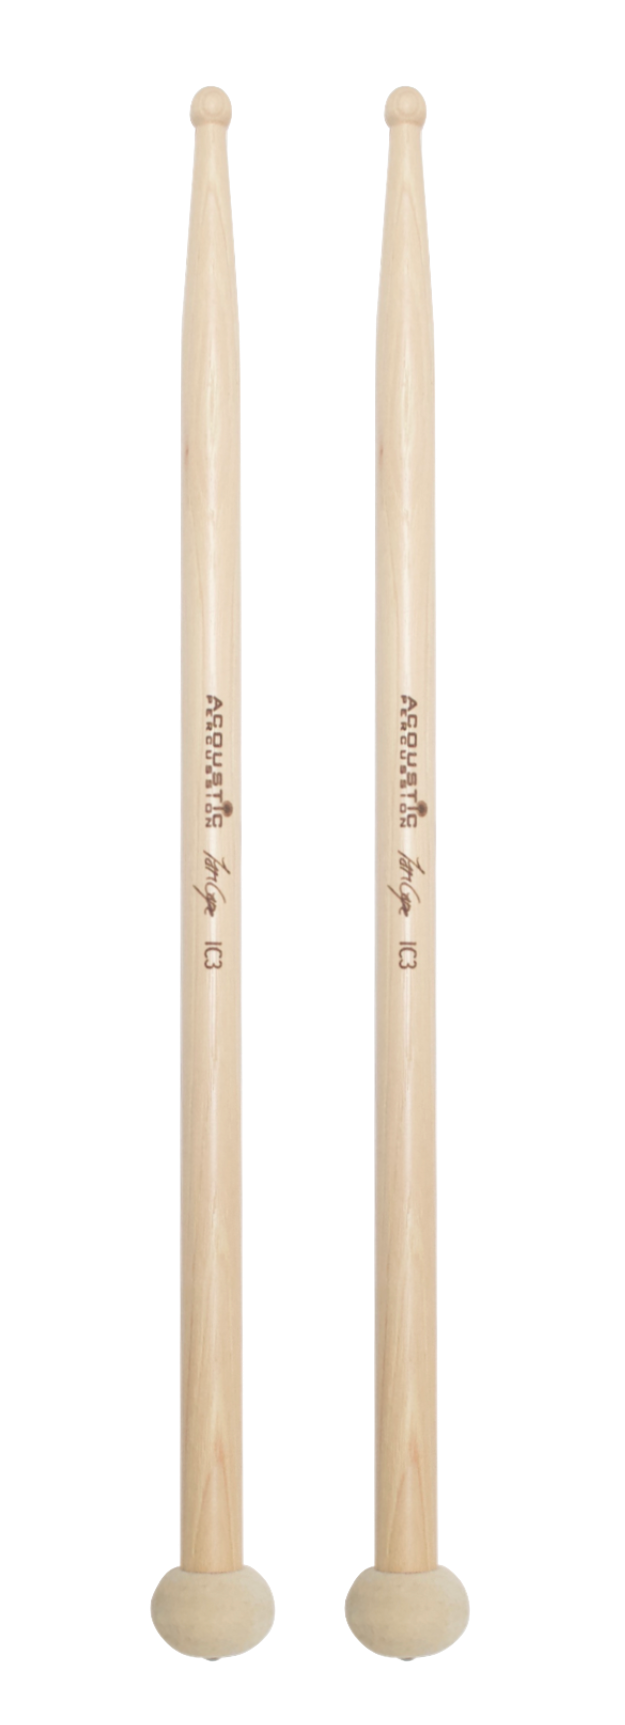 Acoustic Percussion IC3 double ended Timpani/snare drum sticks